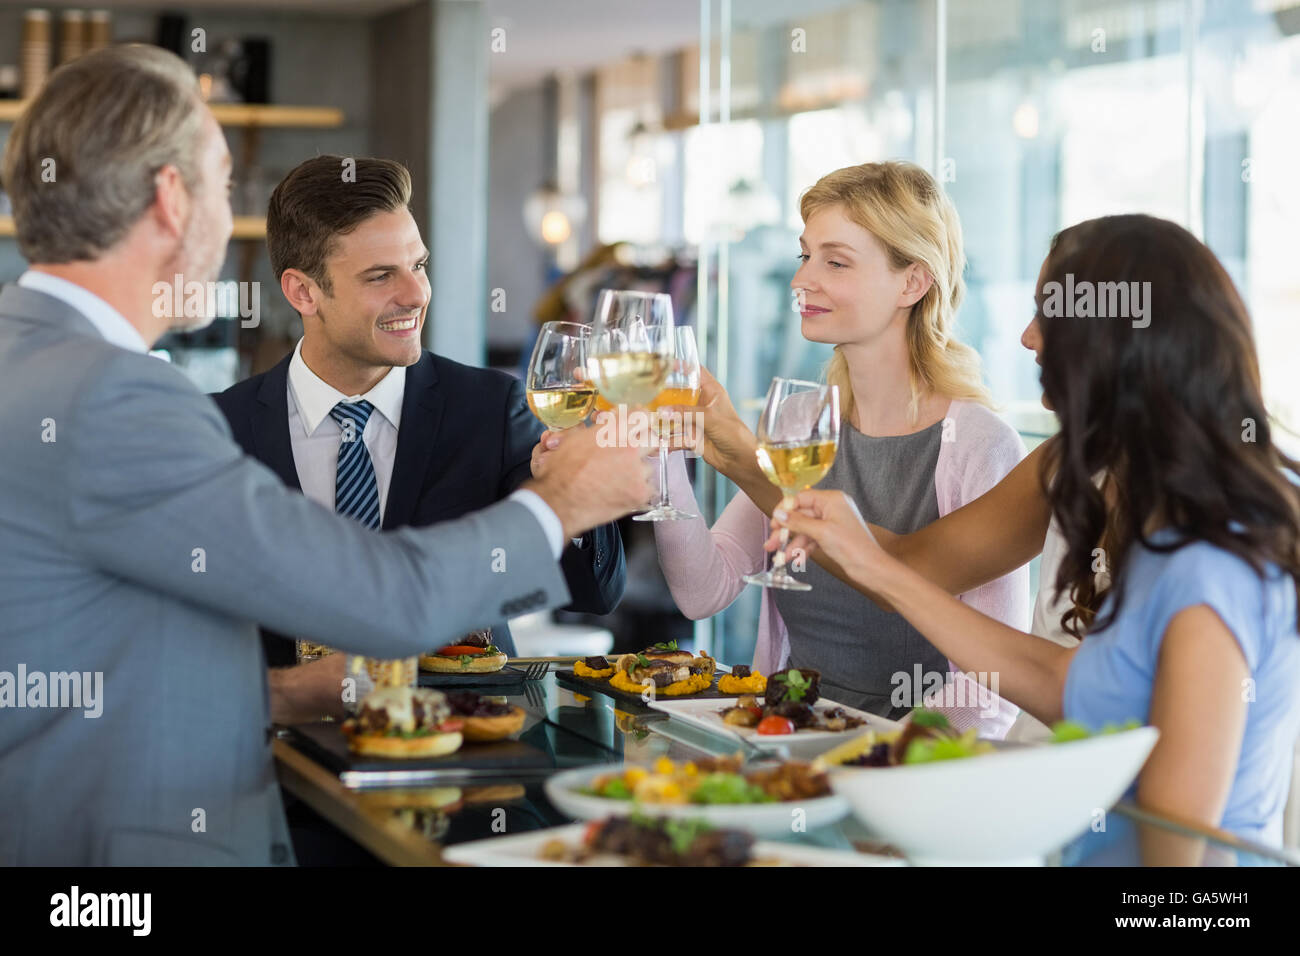 Business colleagues toasting beer glasses while having lunch Stock Photo